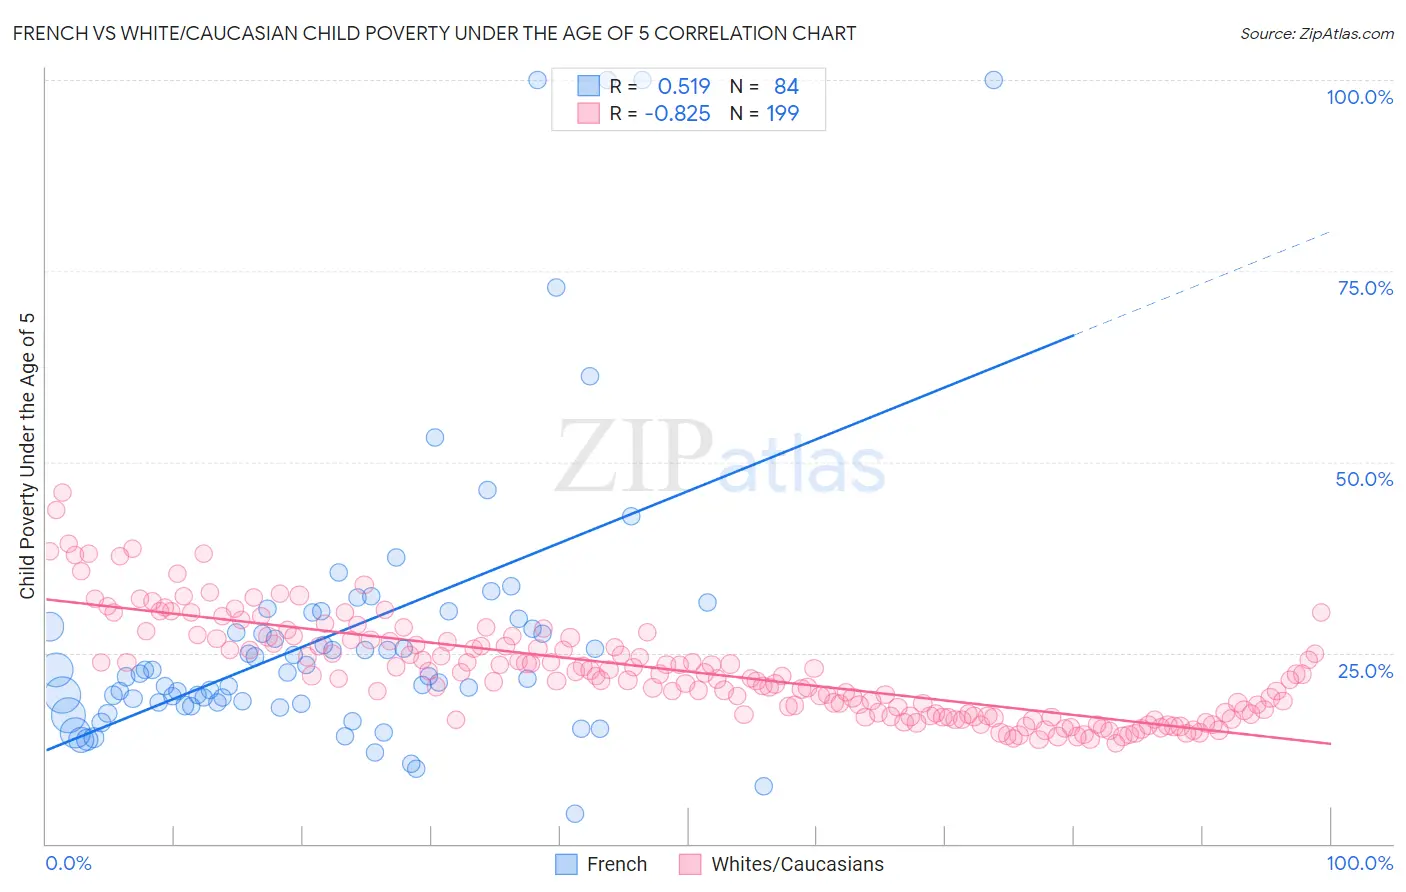 French vs White/Caucasian Child Poverty Under the Age of 5